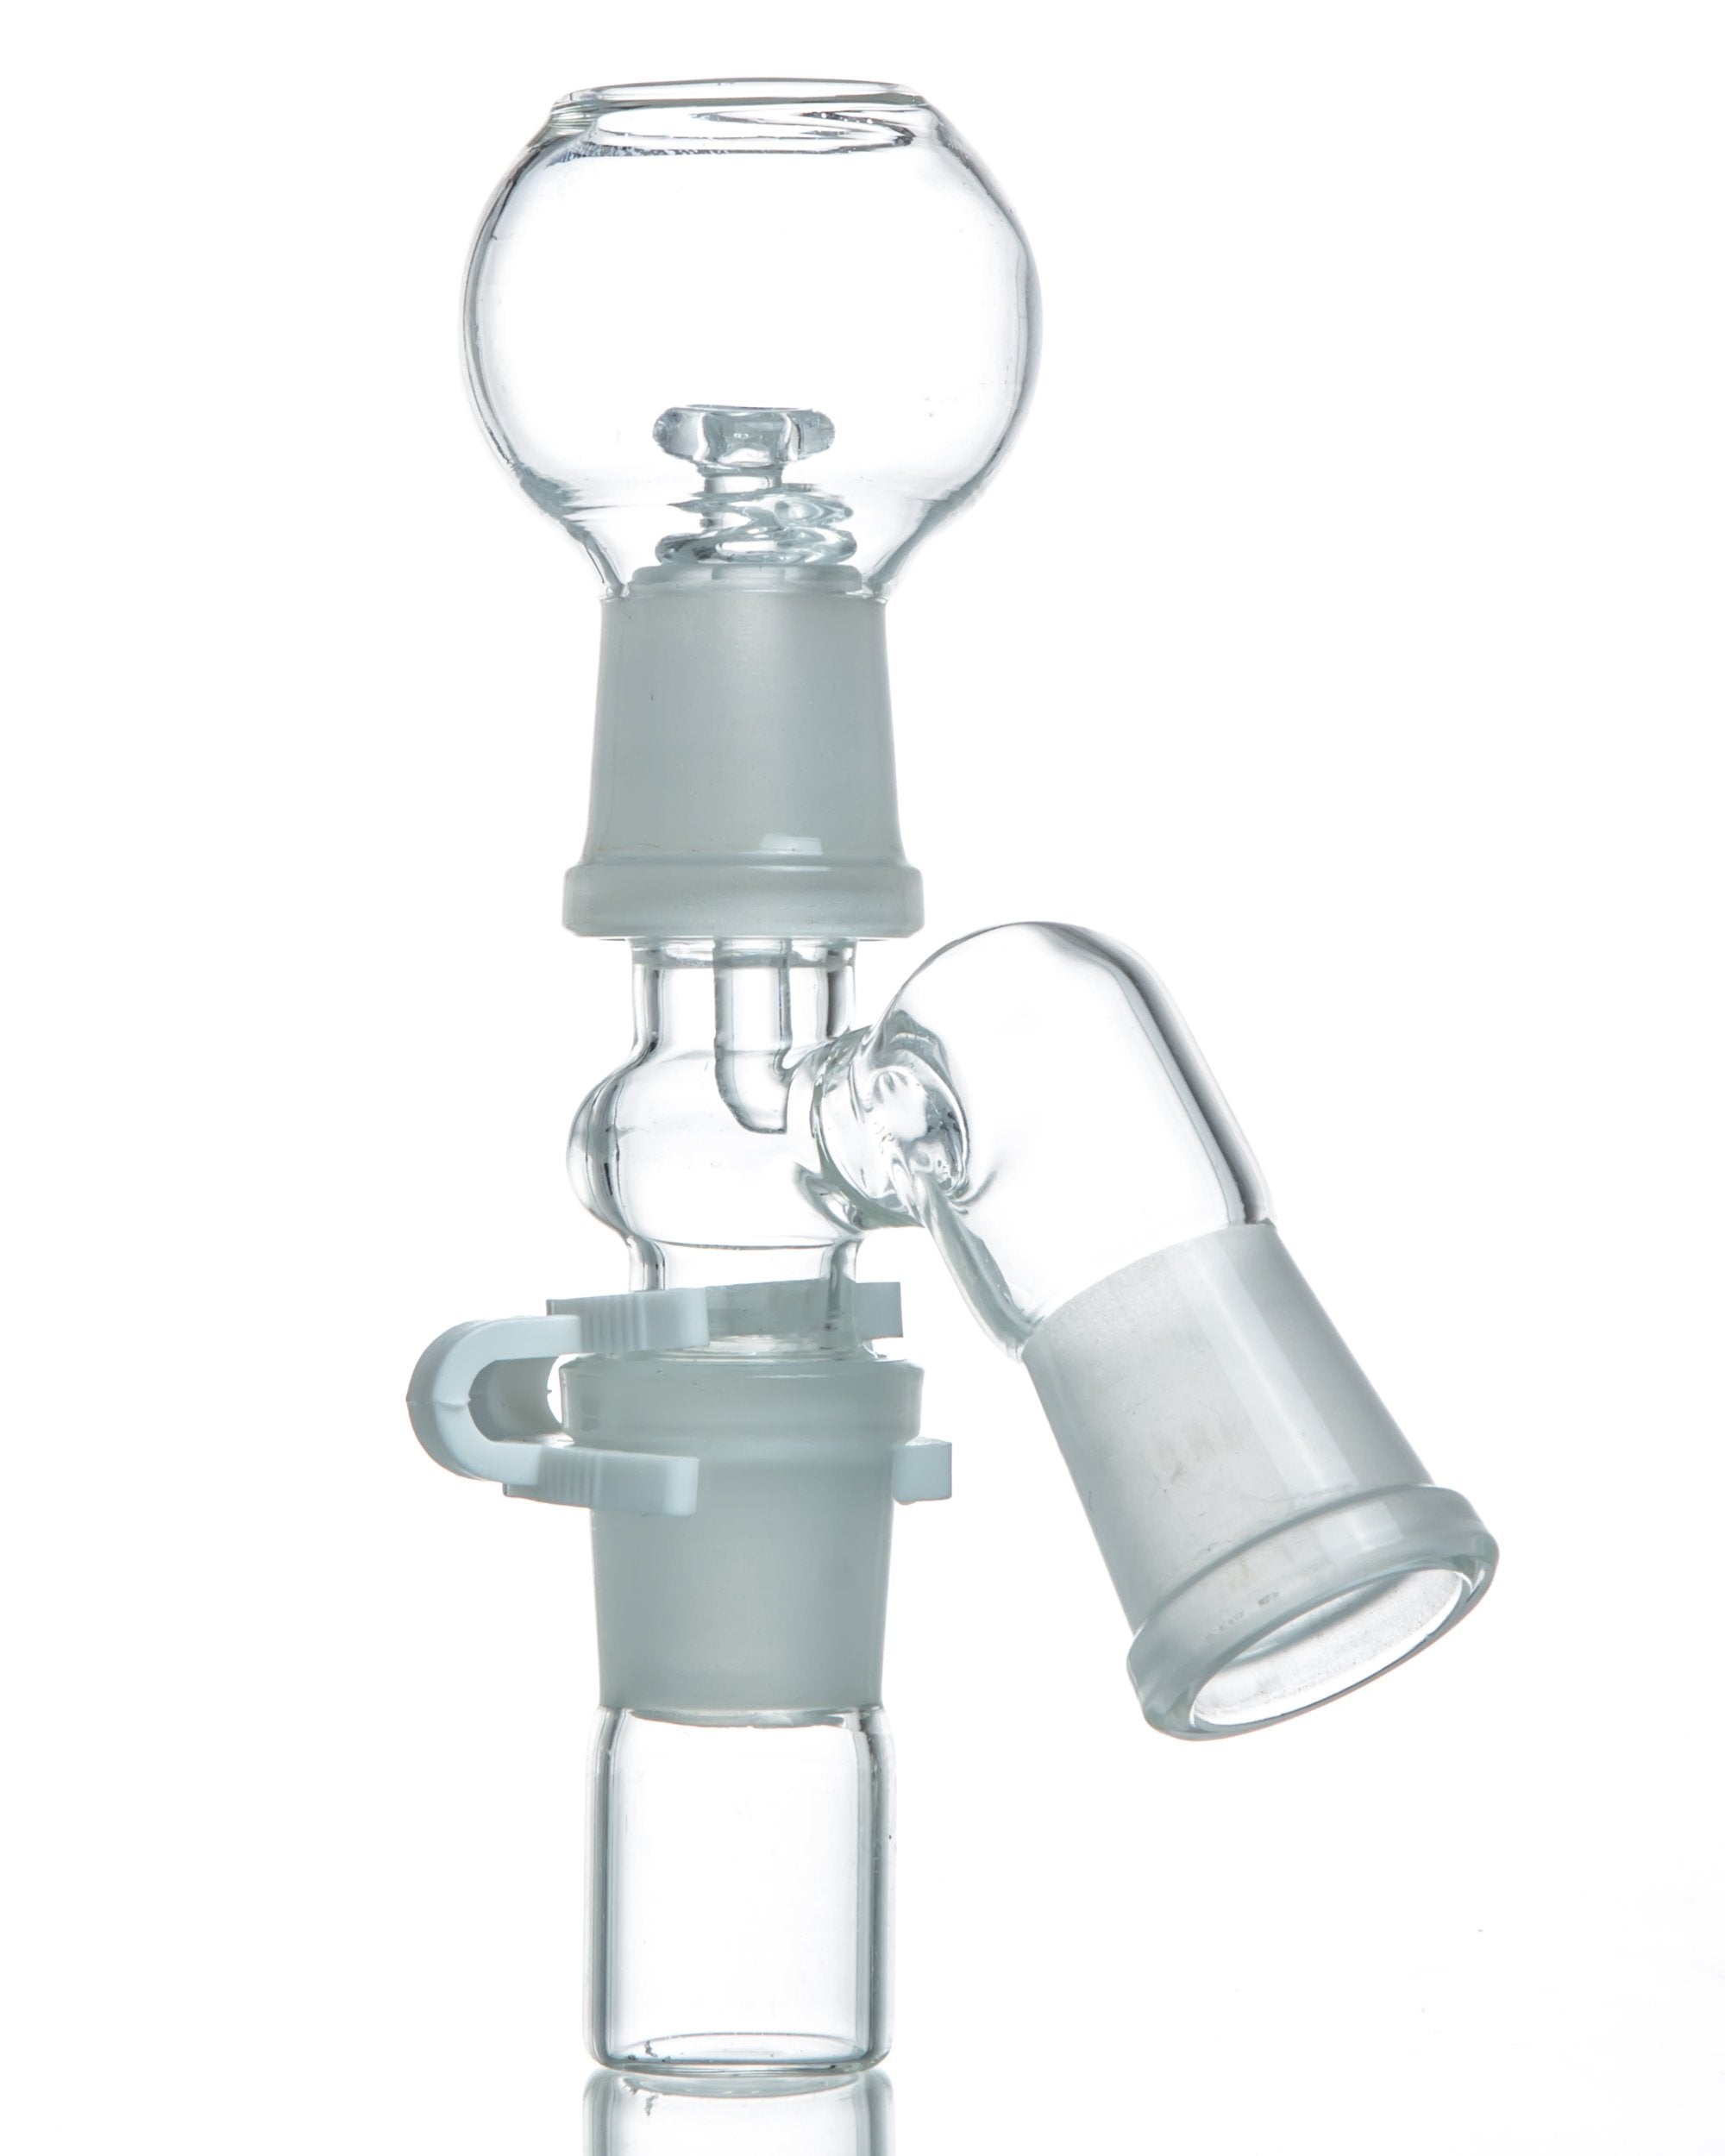 Heady Glass Versus Scientific Glass: What Is The Difference? Which Is Best?